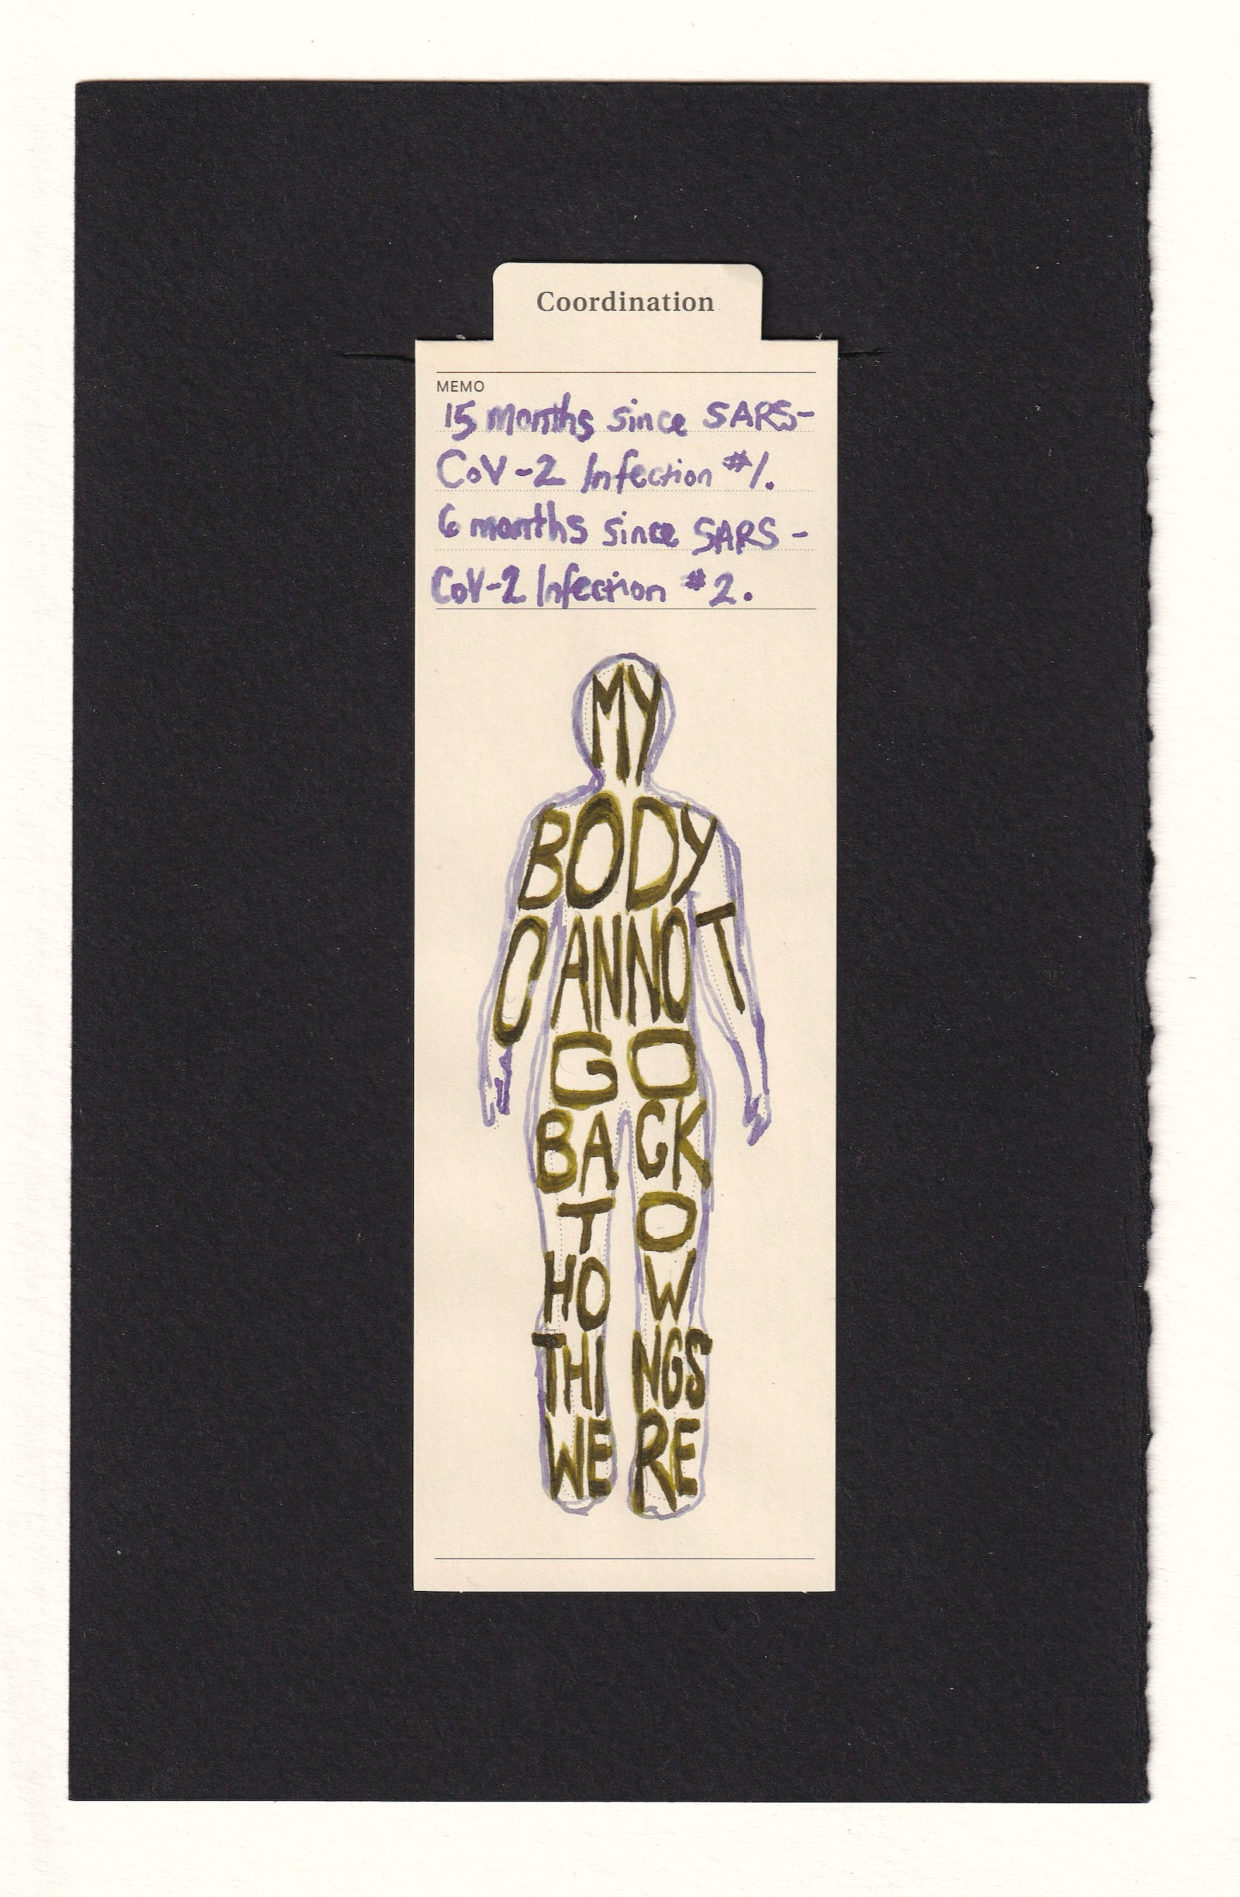 Outline of a body with the text "My Body Cannot Go Back to How Things Were" in caps written filling the outline. The outline of the body is in lavender, the text in dark-yellow-black.